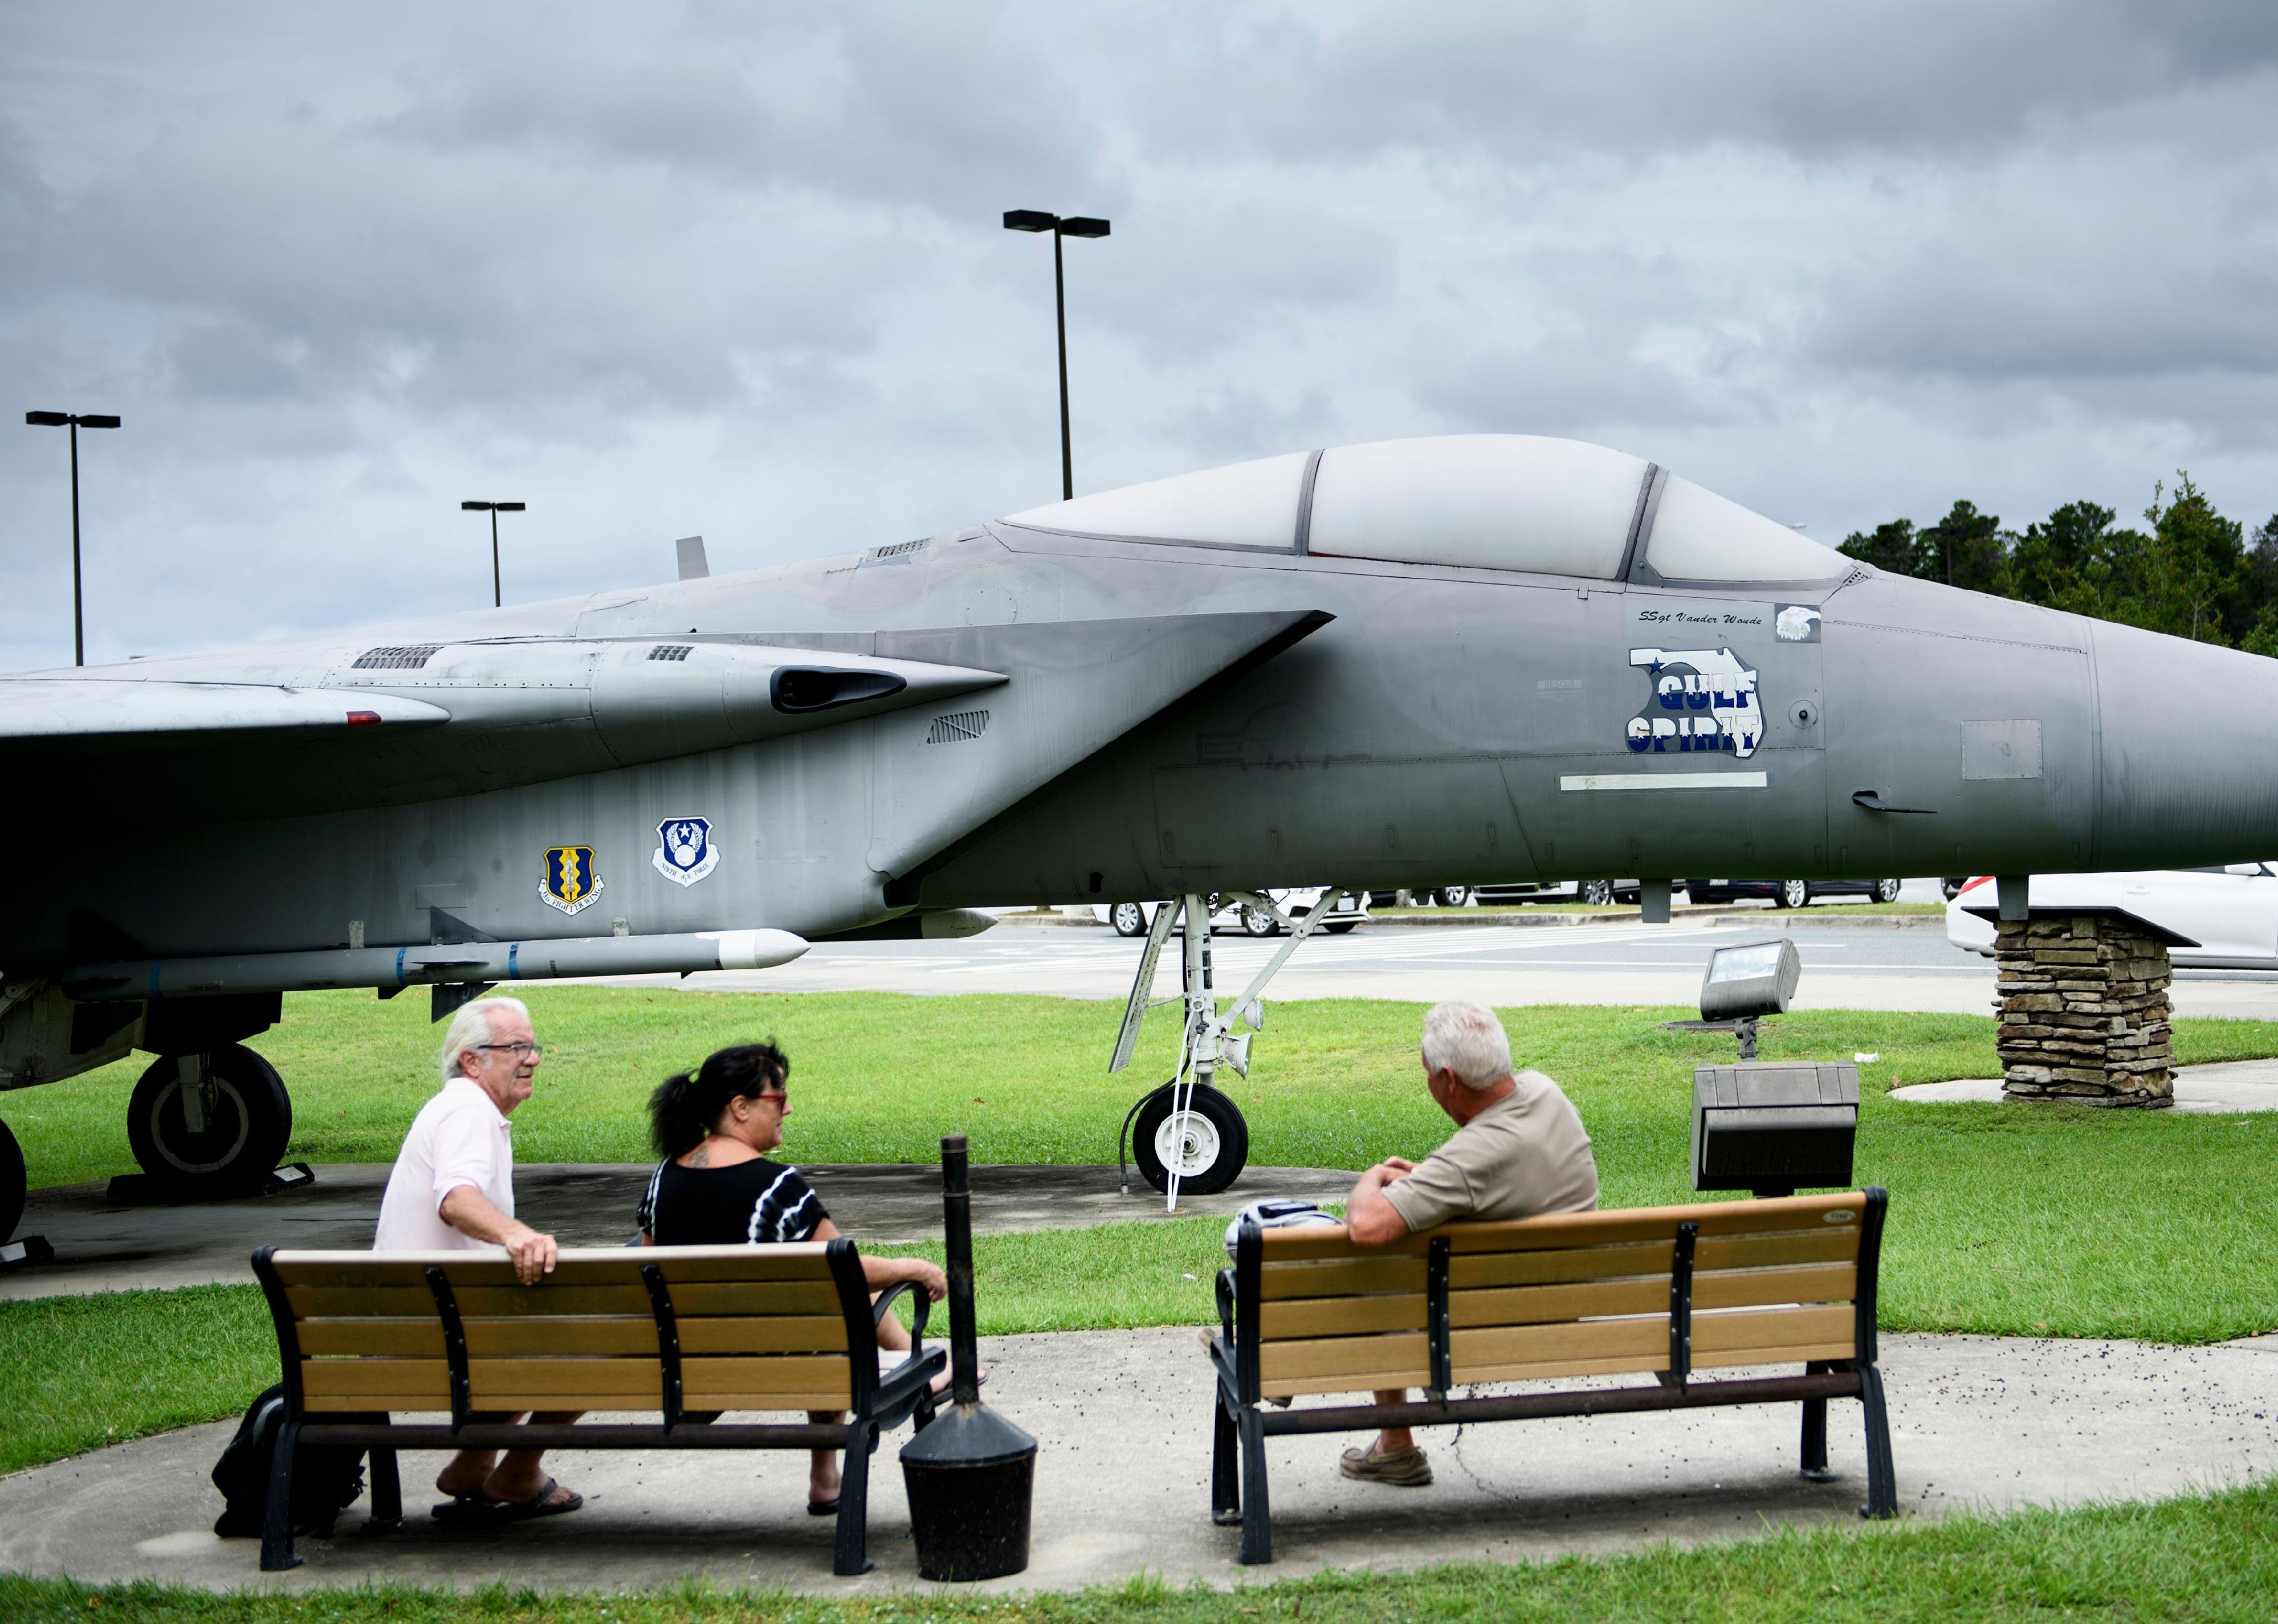 People sit on park benches in front of a military jet at Fort Walton Beach airport.